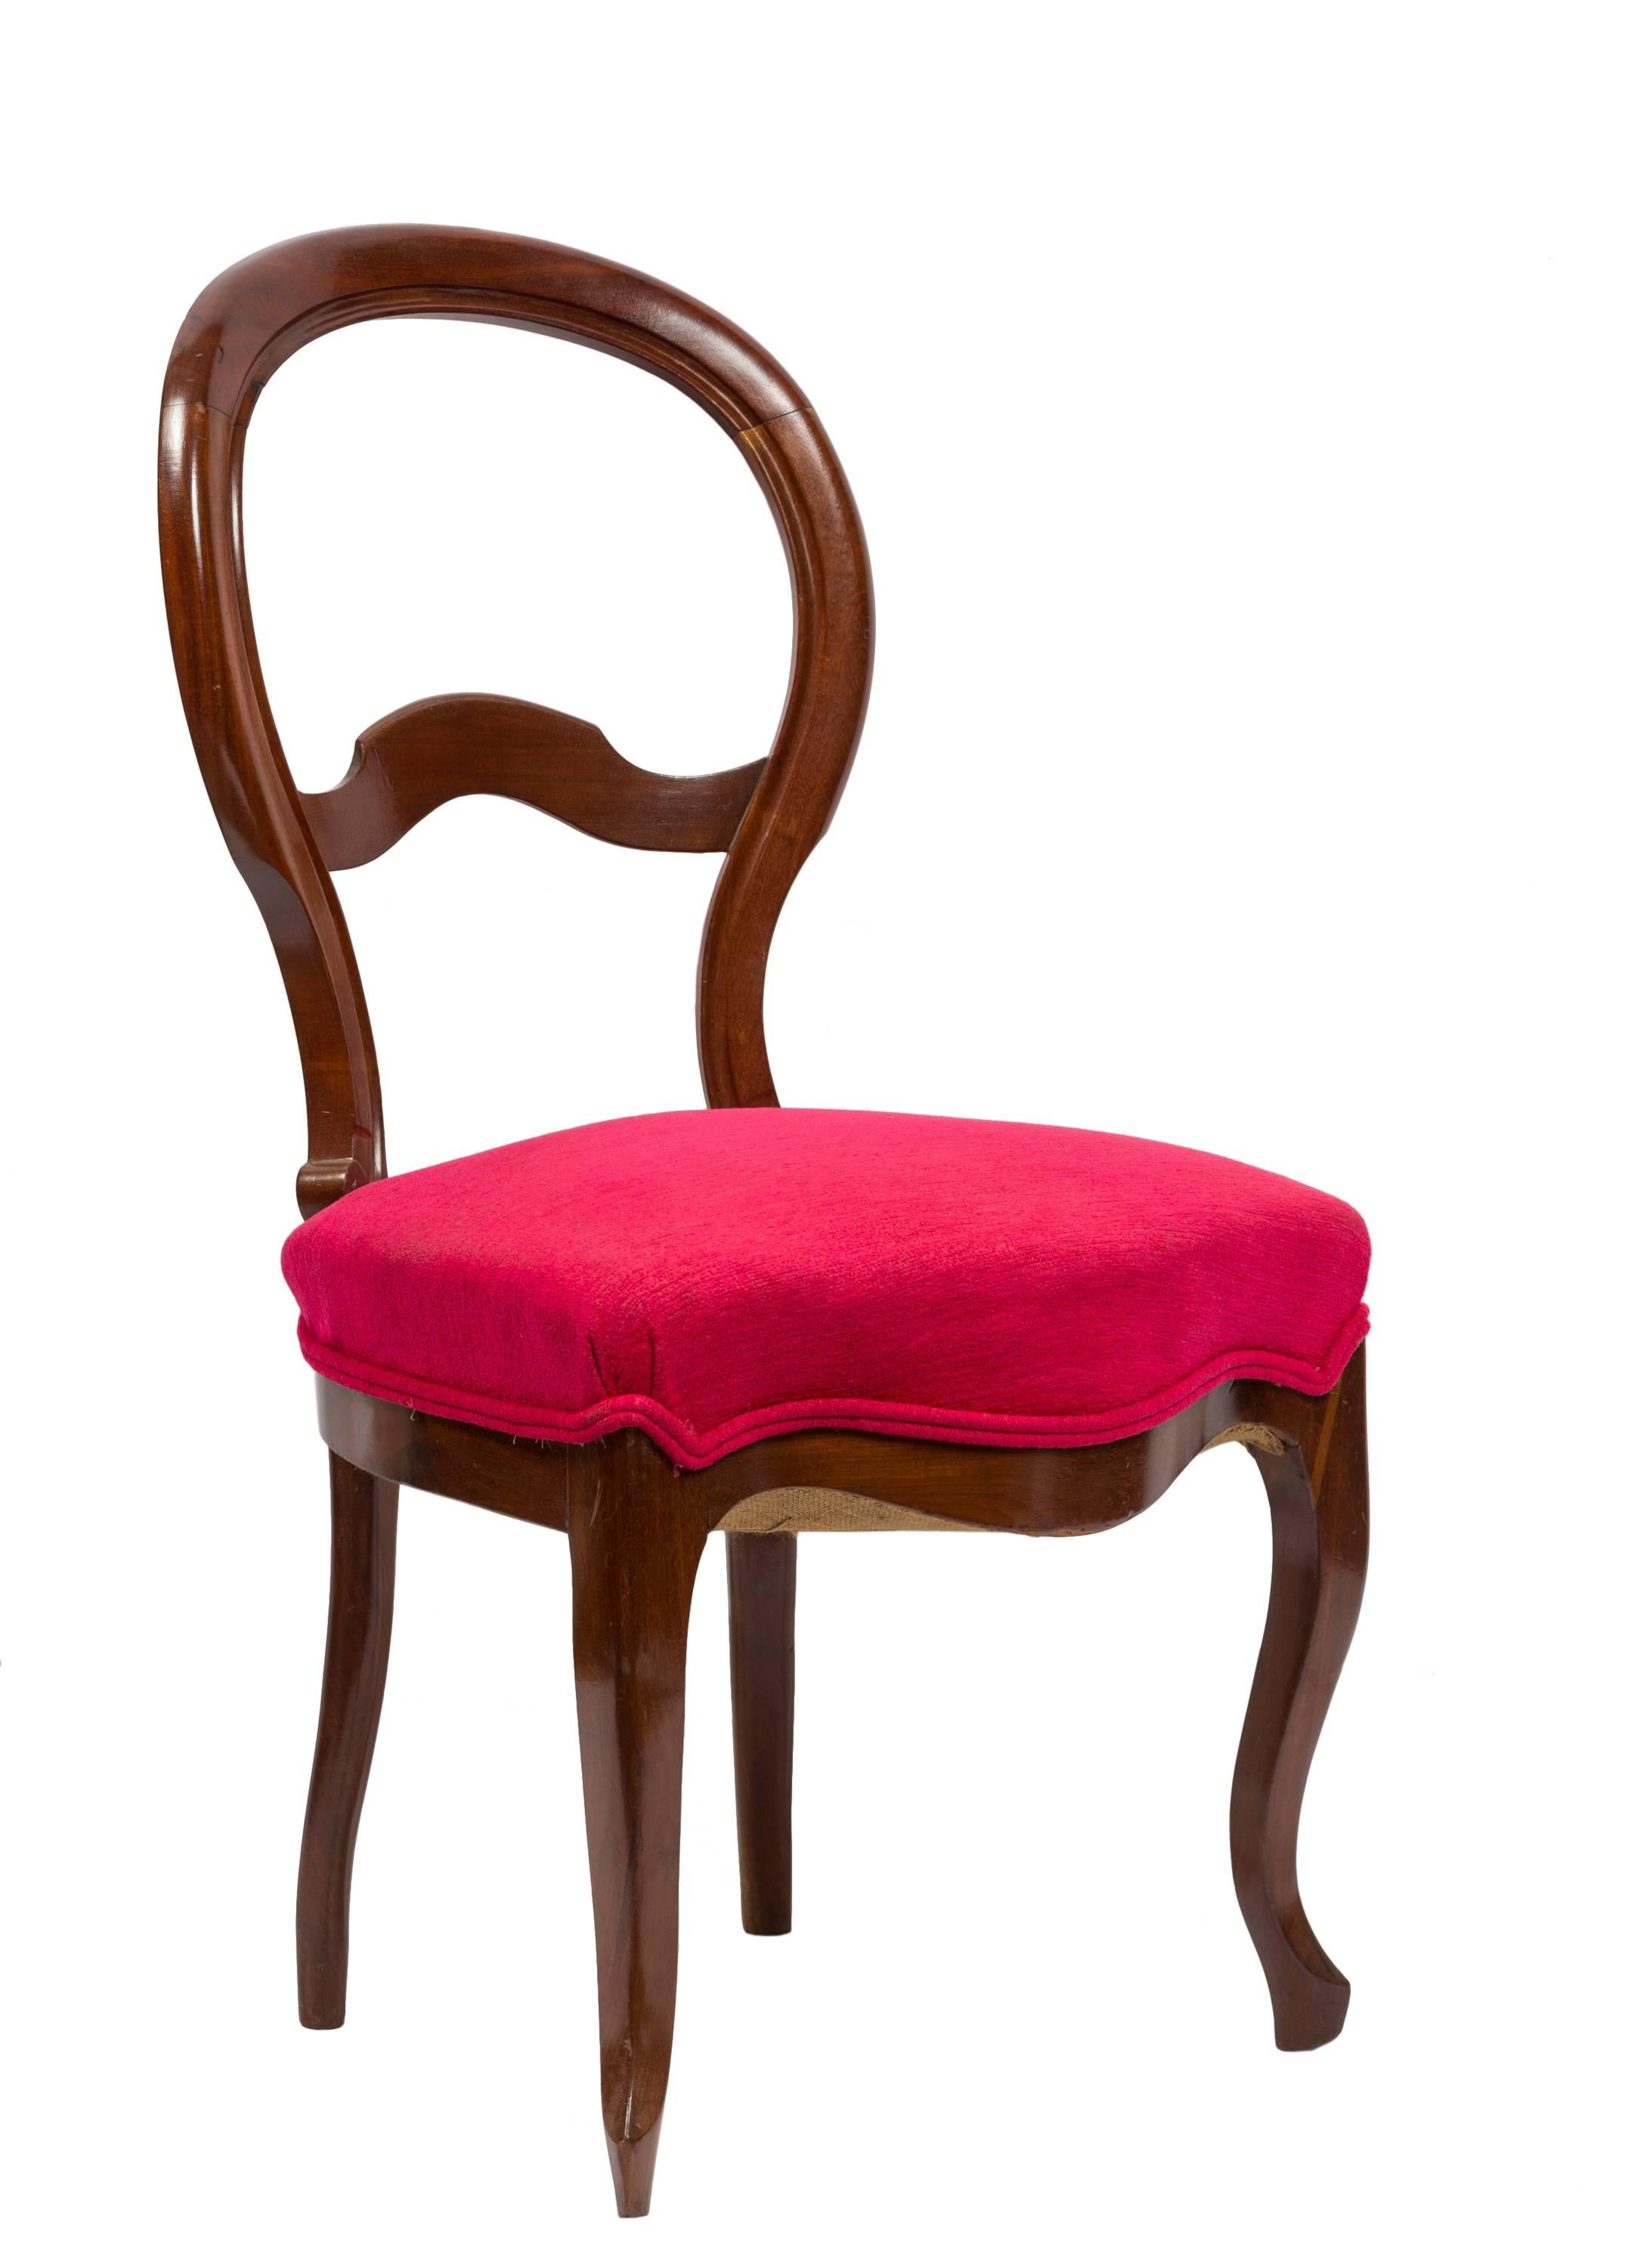 Pair of Unmatched 19th Century Walnut and Magenta Red Fabric Spanish Chairs 1